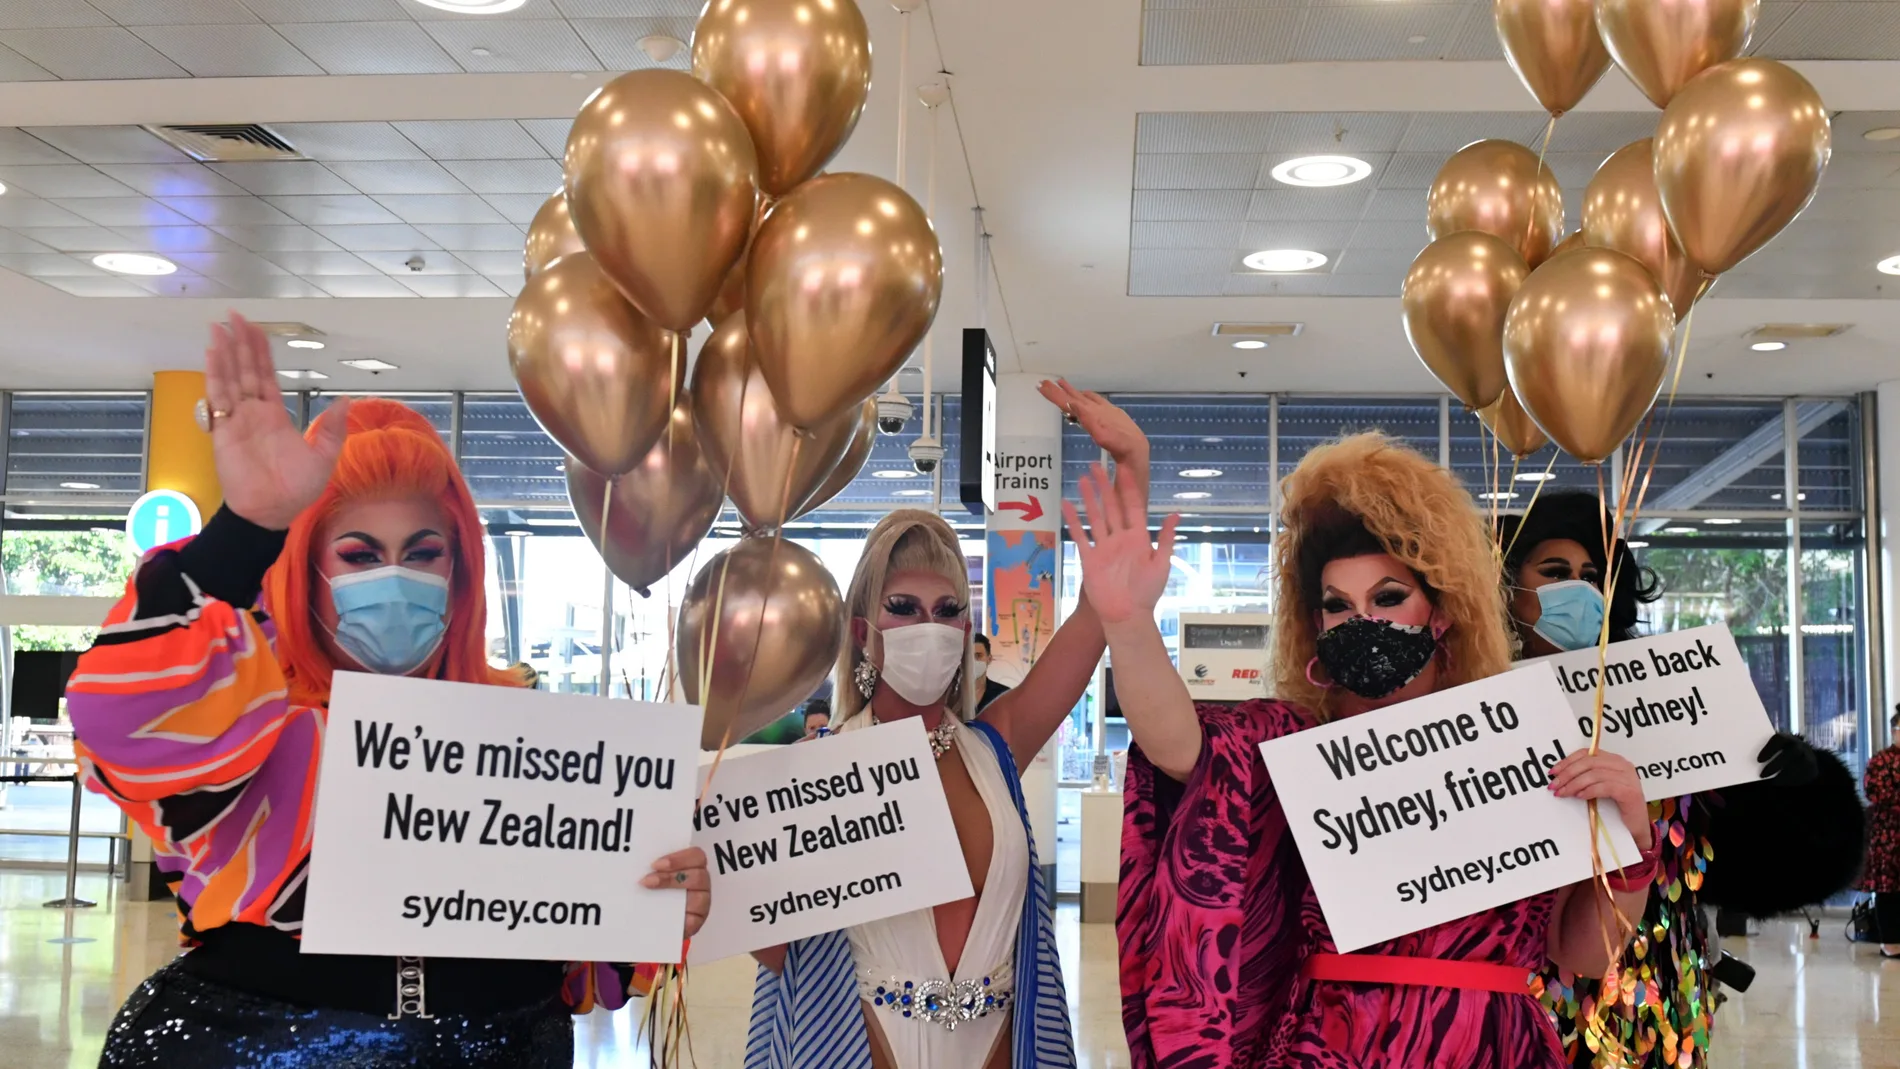 Sydney (Australia), 18/04/2021.- Drag queens welcome New Zealand travellers at Sydney International Airport, Sydney, Australia, 19 April 2021. From Sunday night, travellers from Australia were once again able to travel to New Zealand quarantine-free after more than a year of tight restrictions. (Nueva Zelanda) EFE/EPA/MICK TSIKAS AUSTRALIA AND NEW ZEALAND OUT